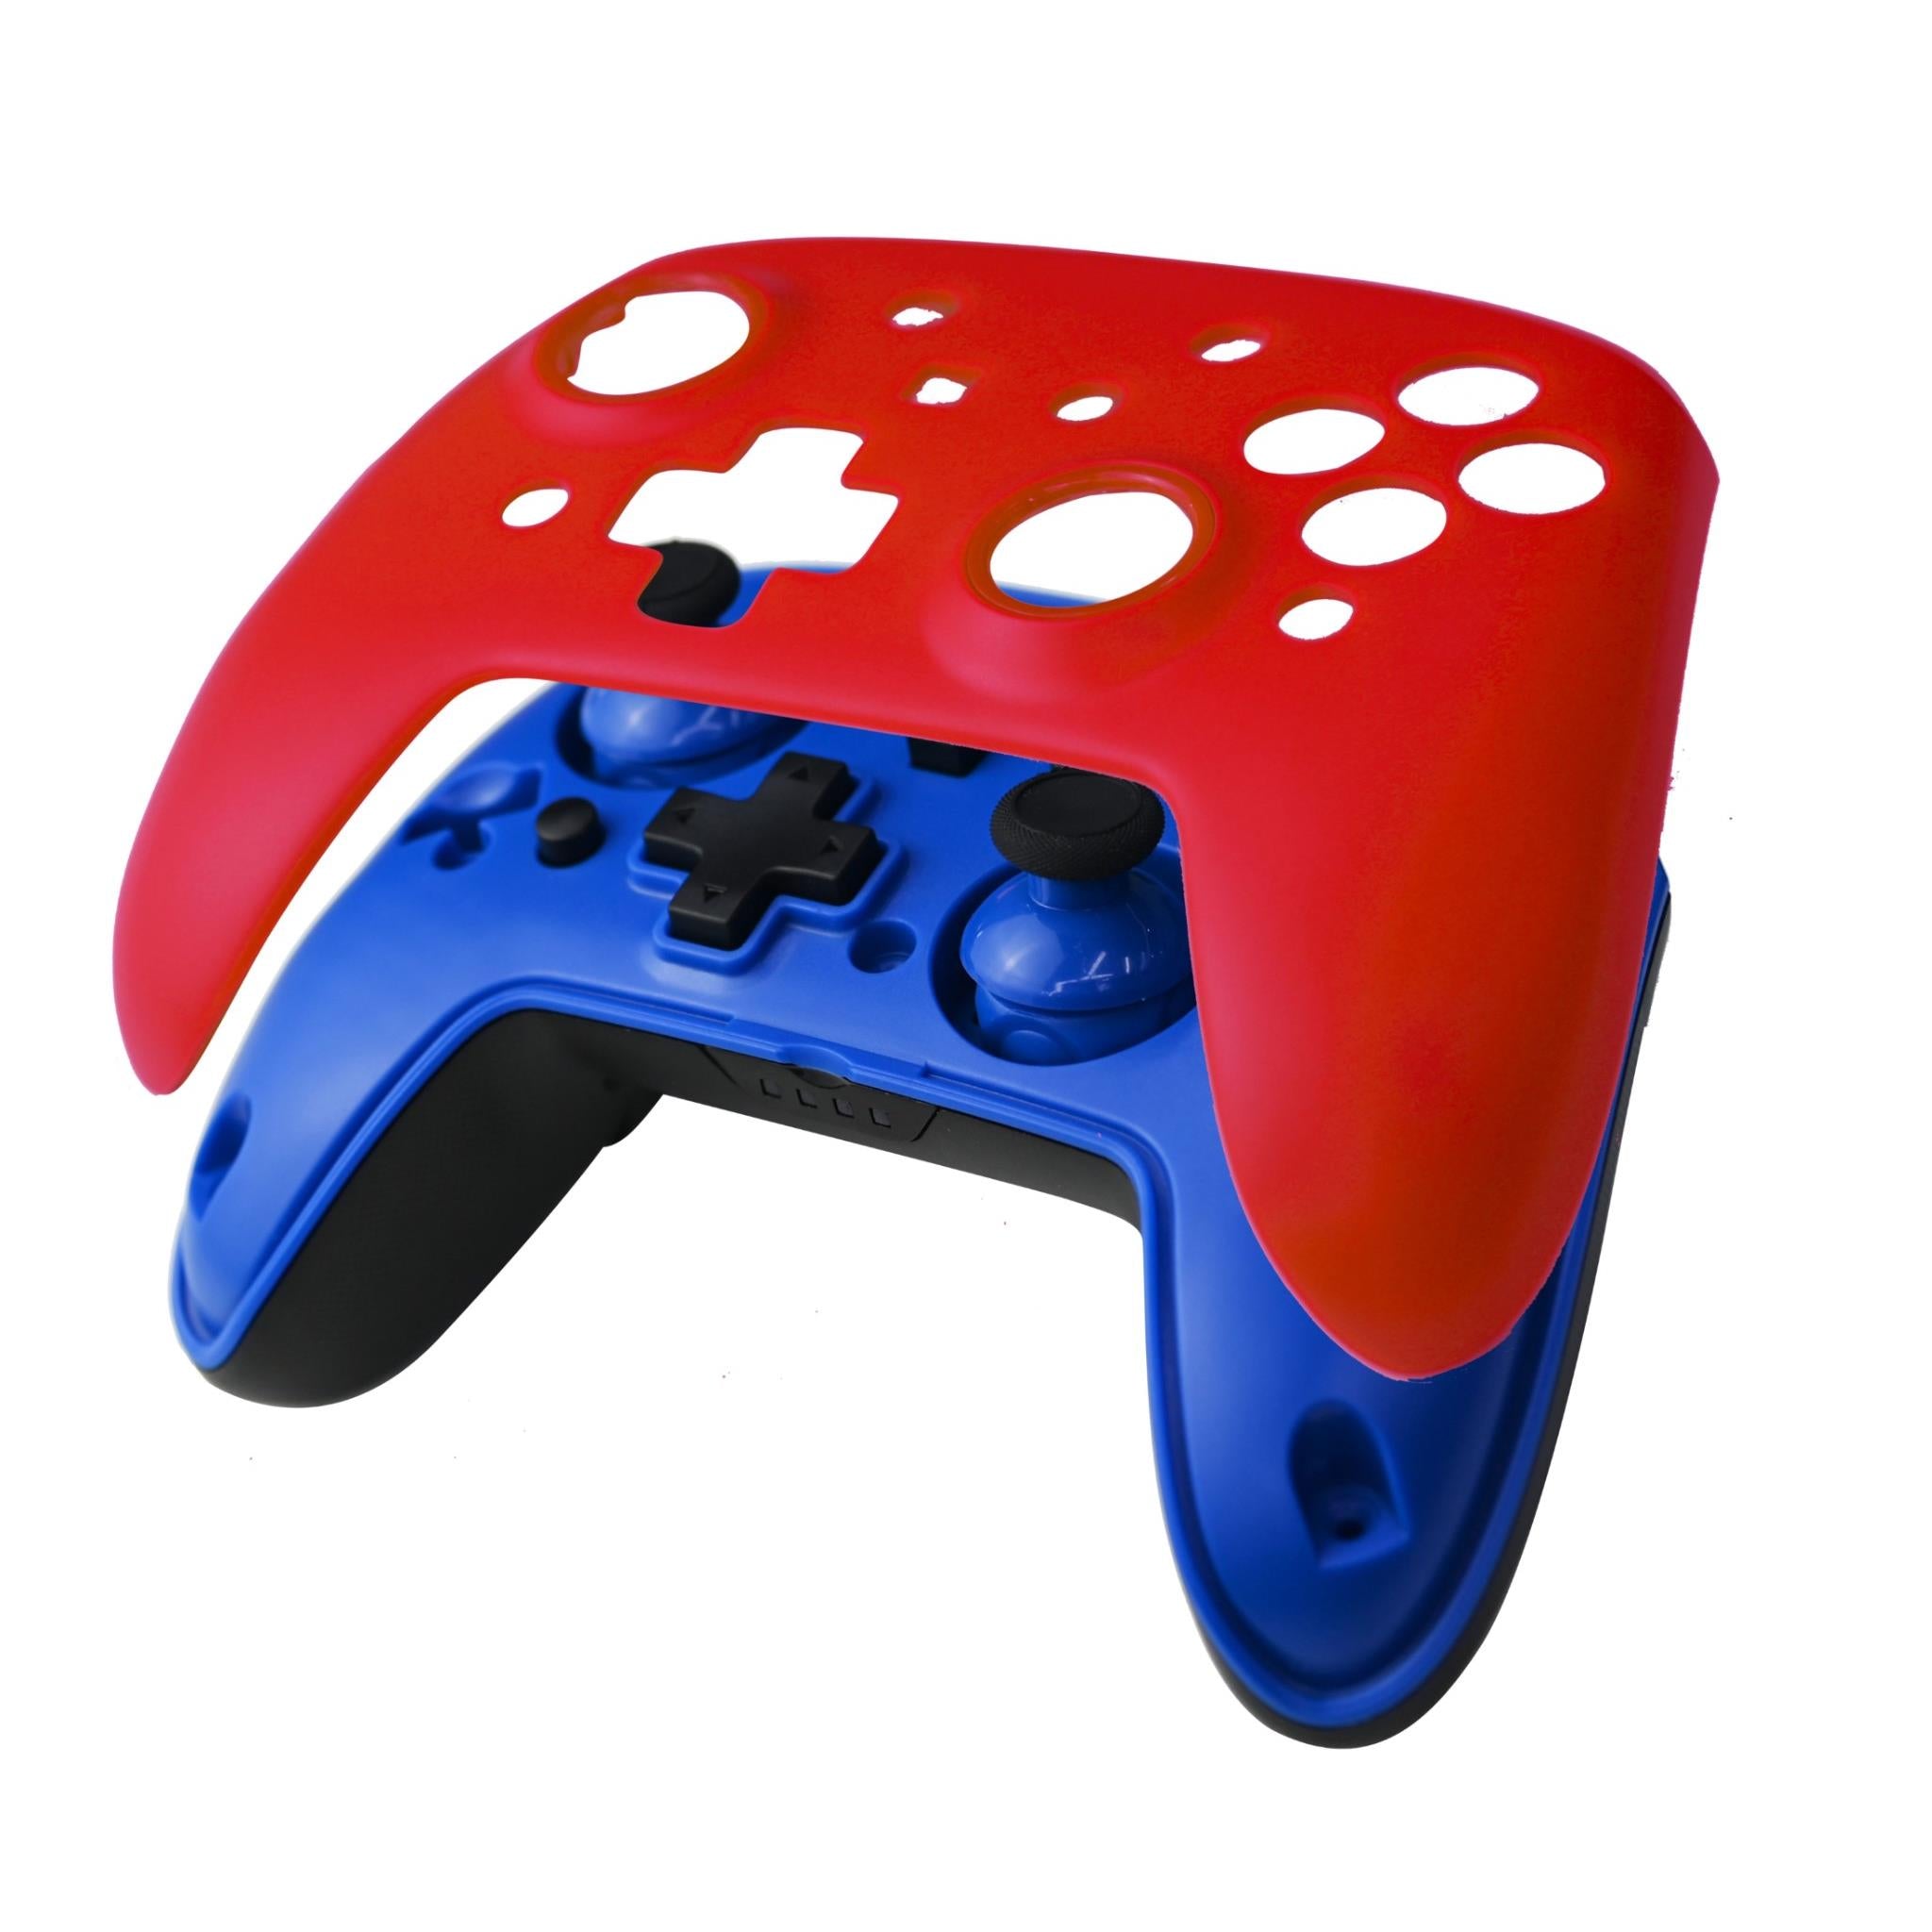 3rd earth wireless controller for switch with interchangeable face plate (blue and red)